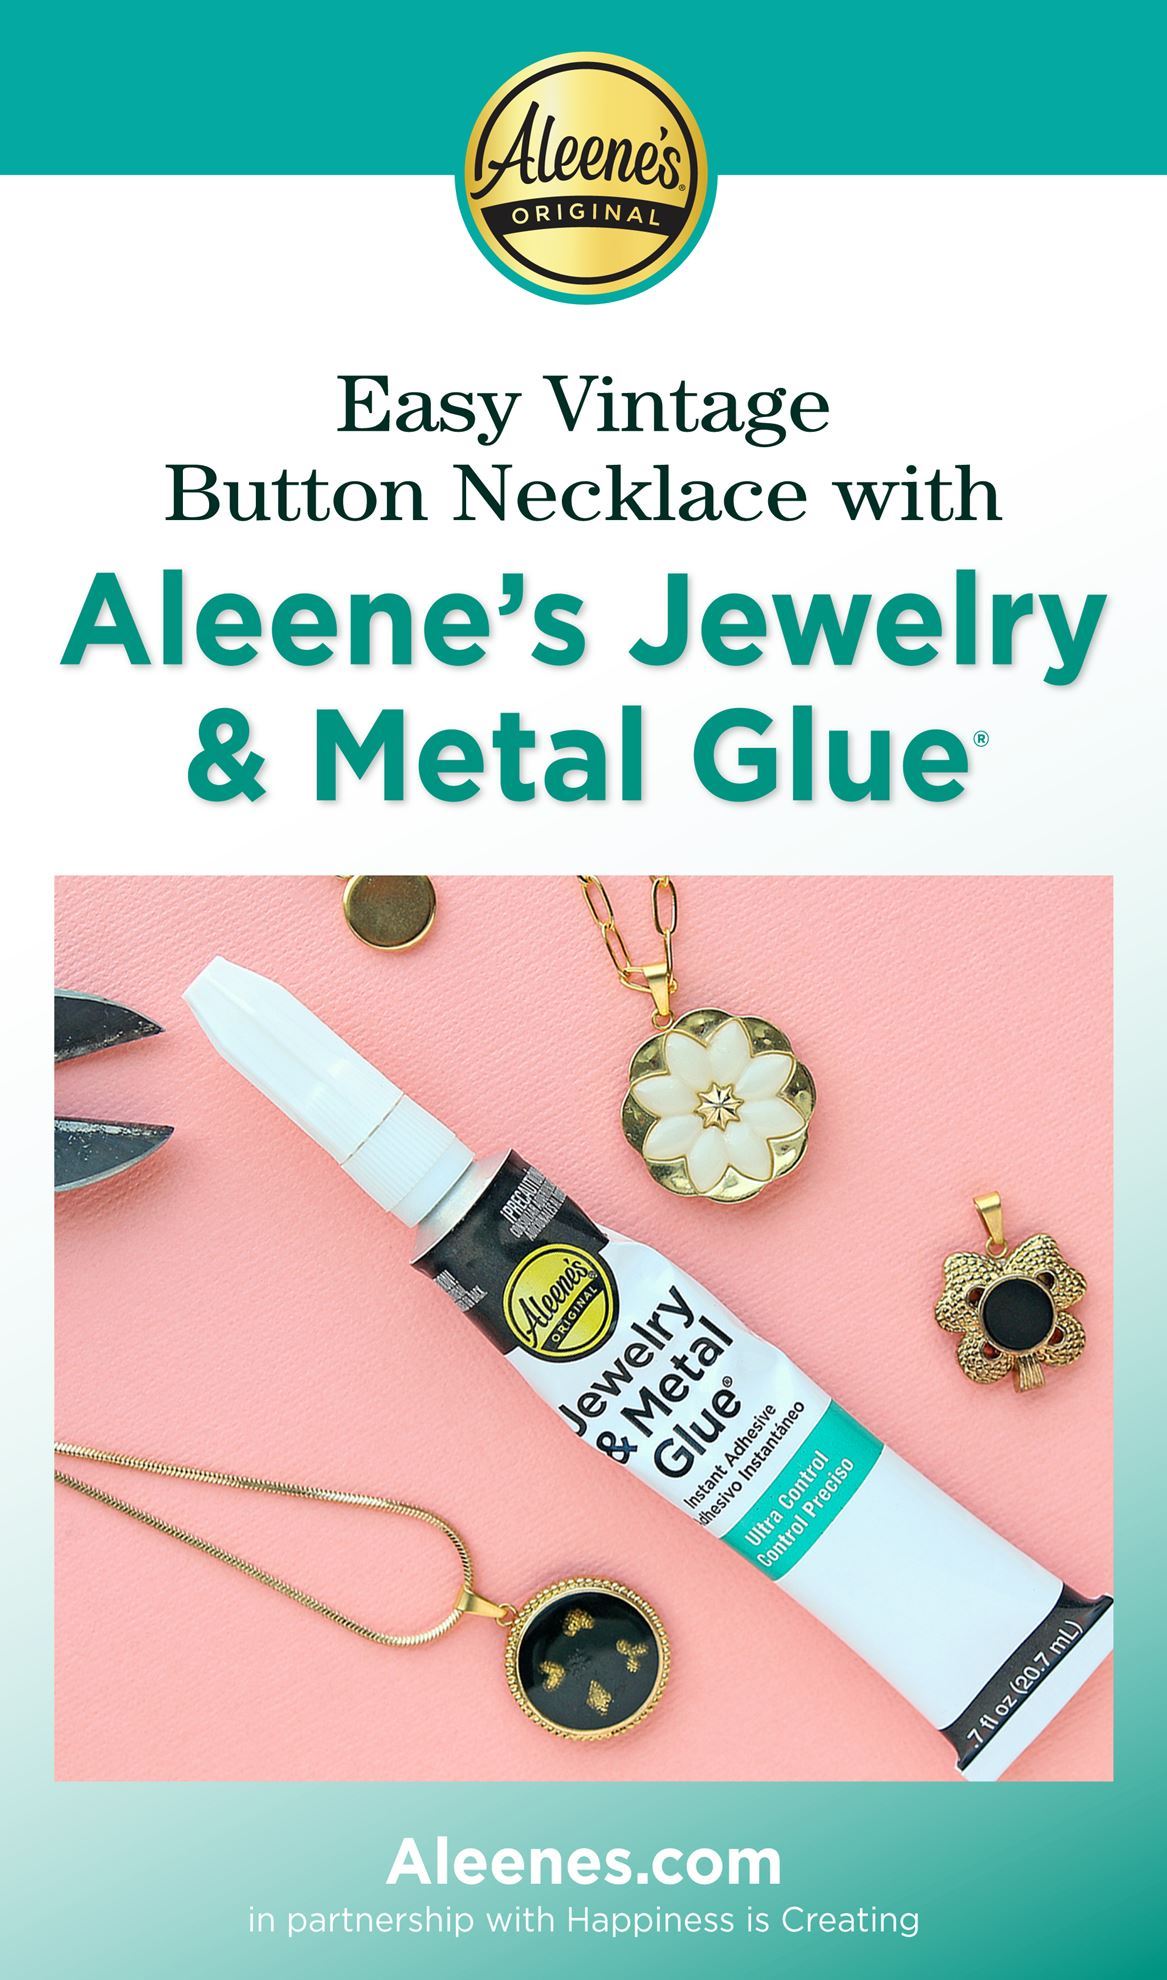 Aleene's Original Glues - Easy Vintage Button Necklace with Jewelry Glue